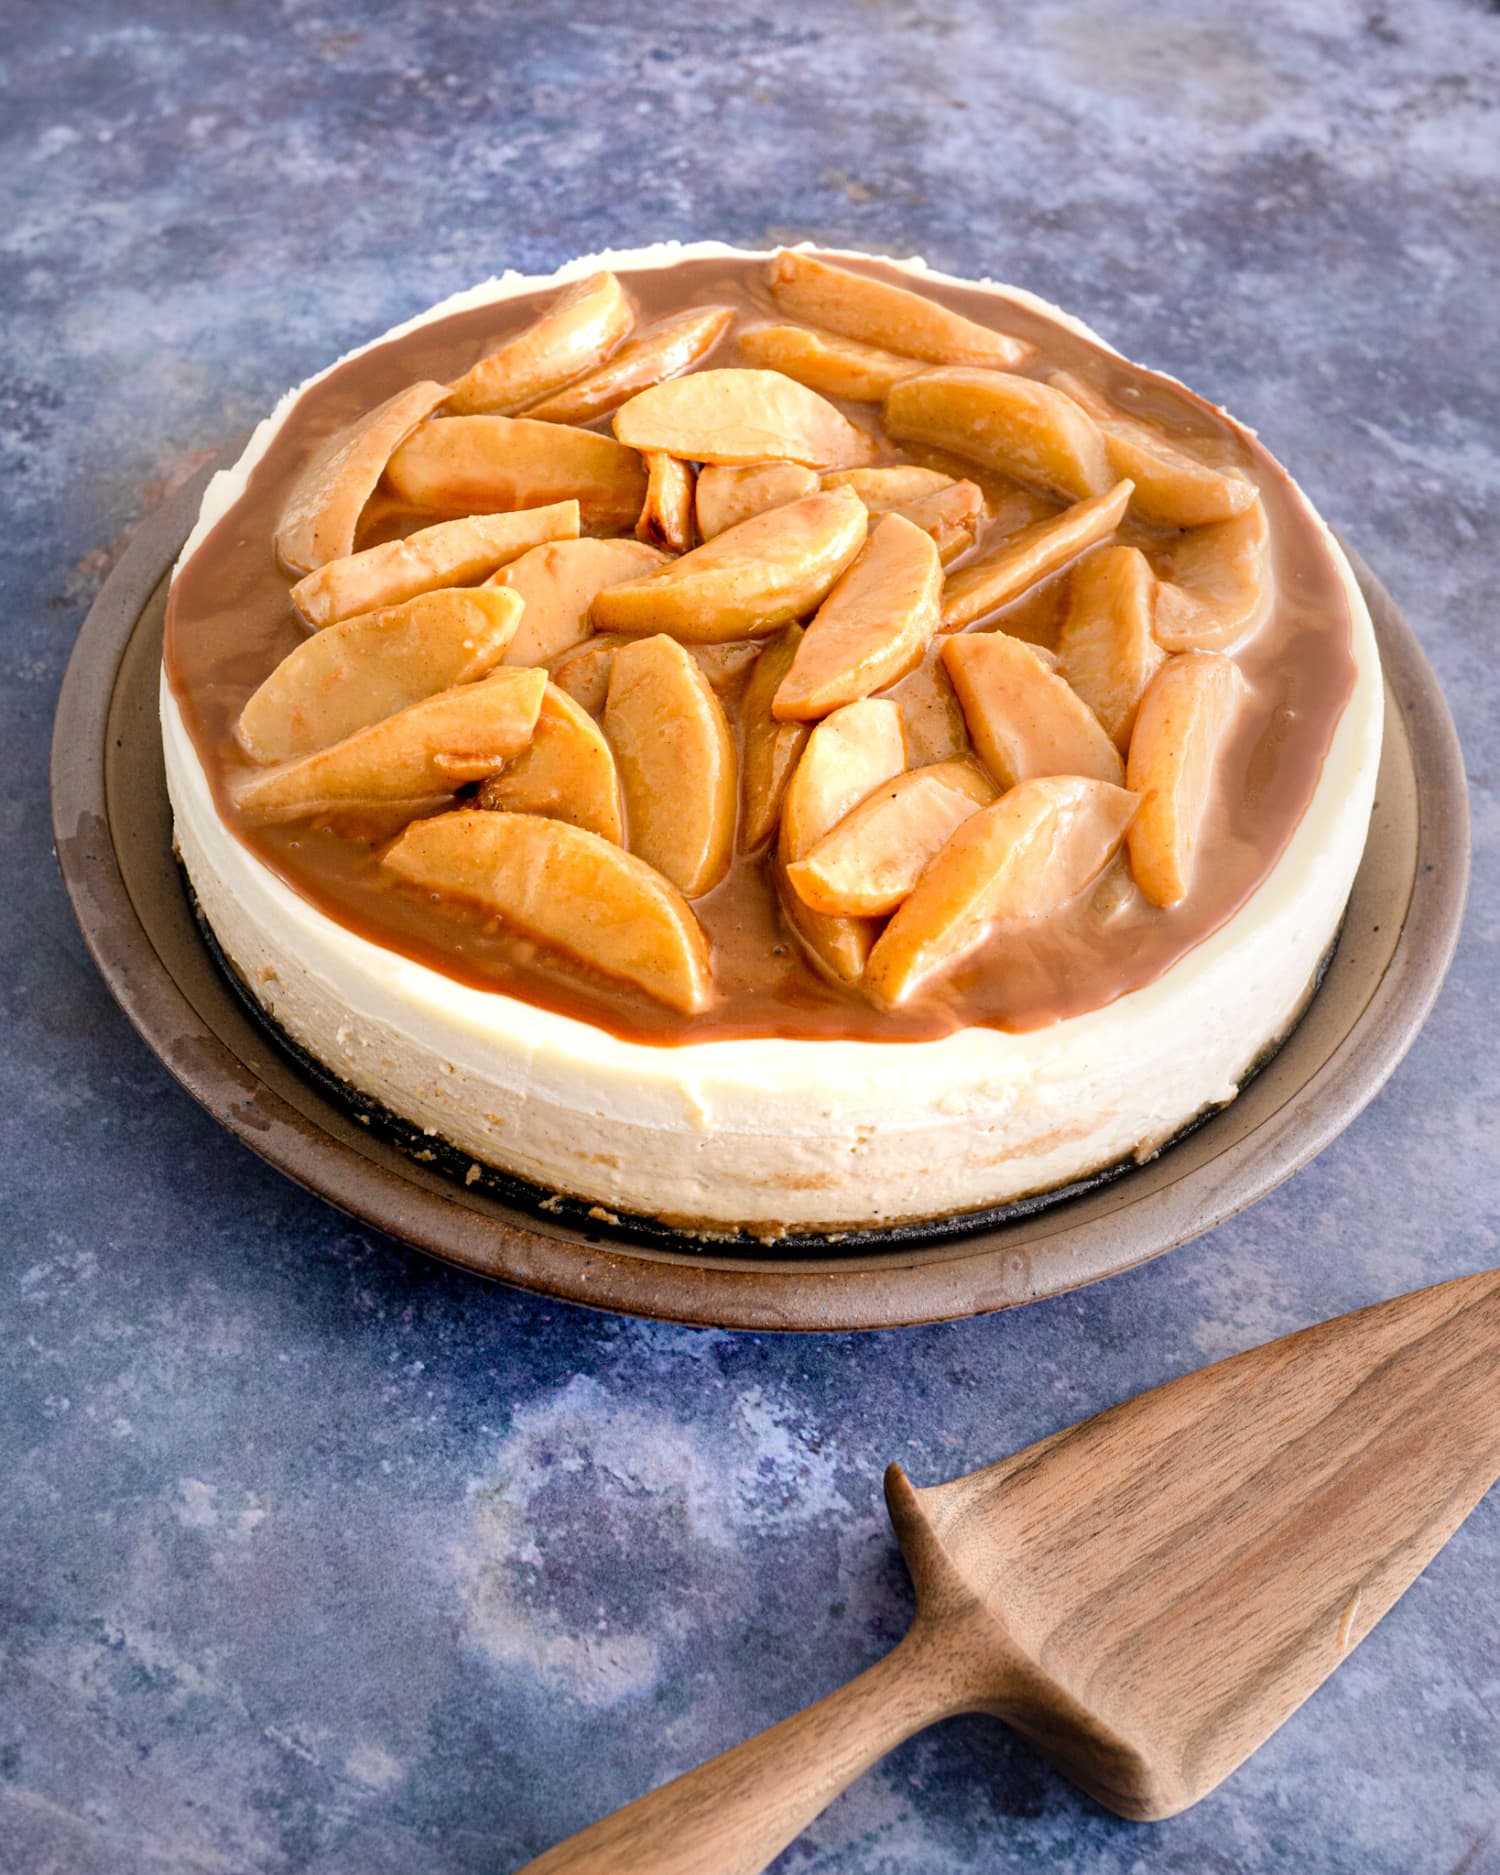 This Layered Caramel Apple Cheesecake Is the Most Impressive Holiday Dessert